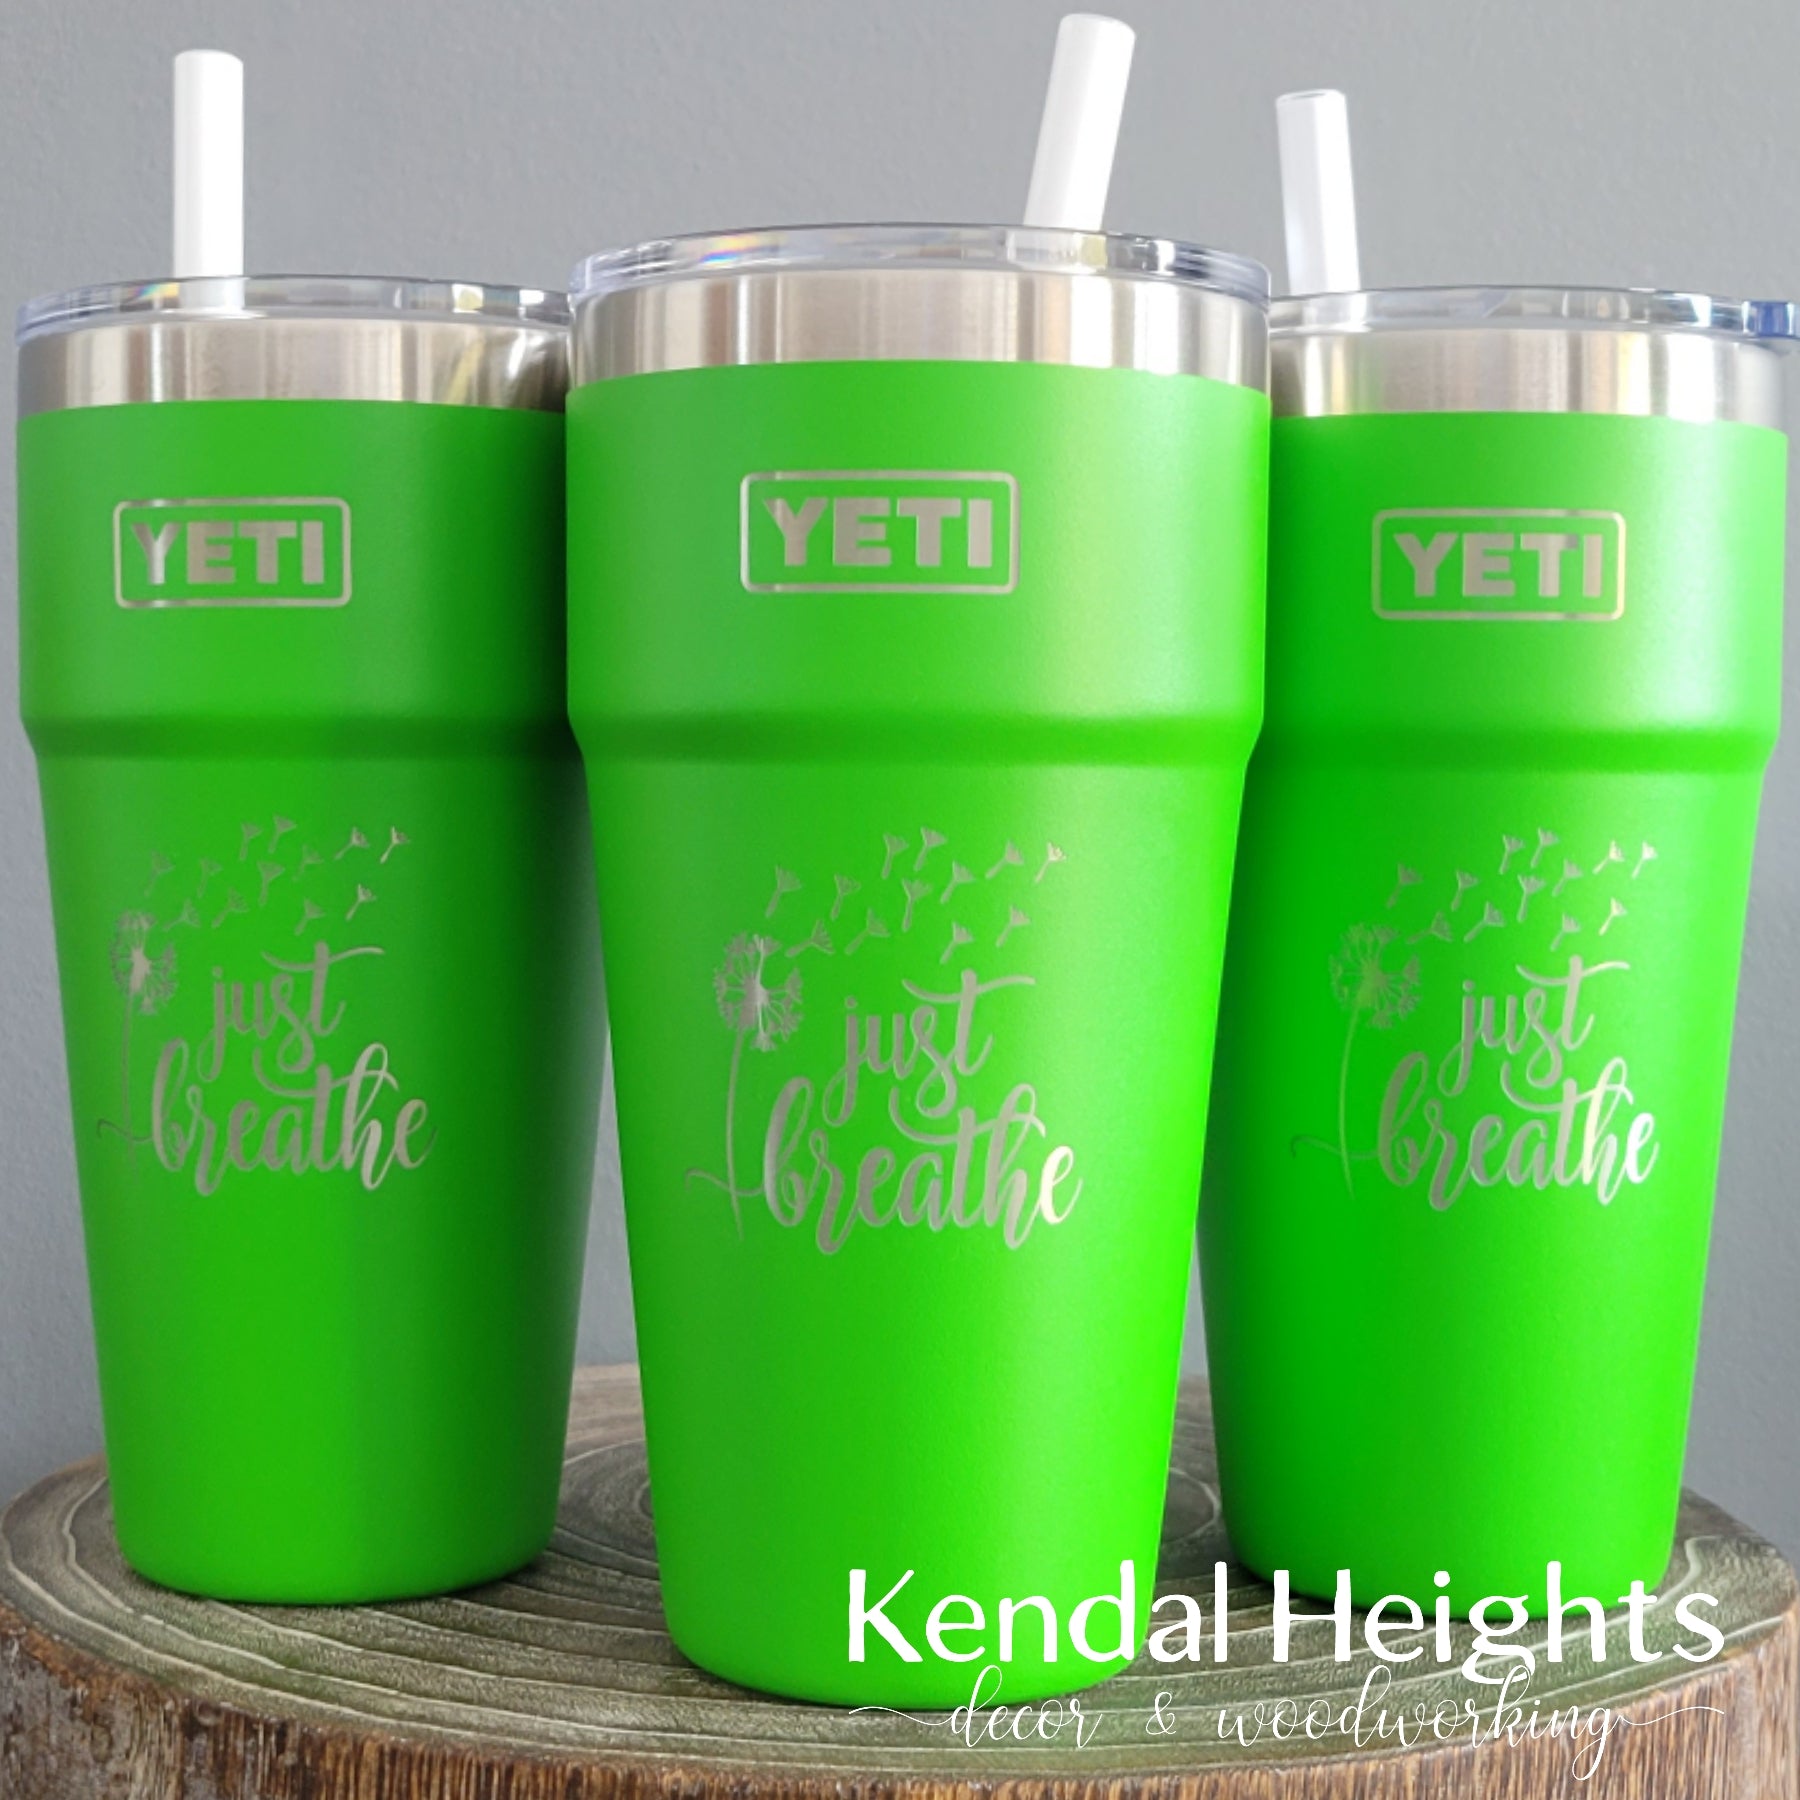  YETI Rambler 26 oz Bottle, Vacuum Insulated, Stainless Steel  with Straw Cap, Canopy Green: Home & Kitchen